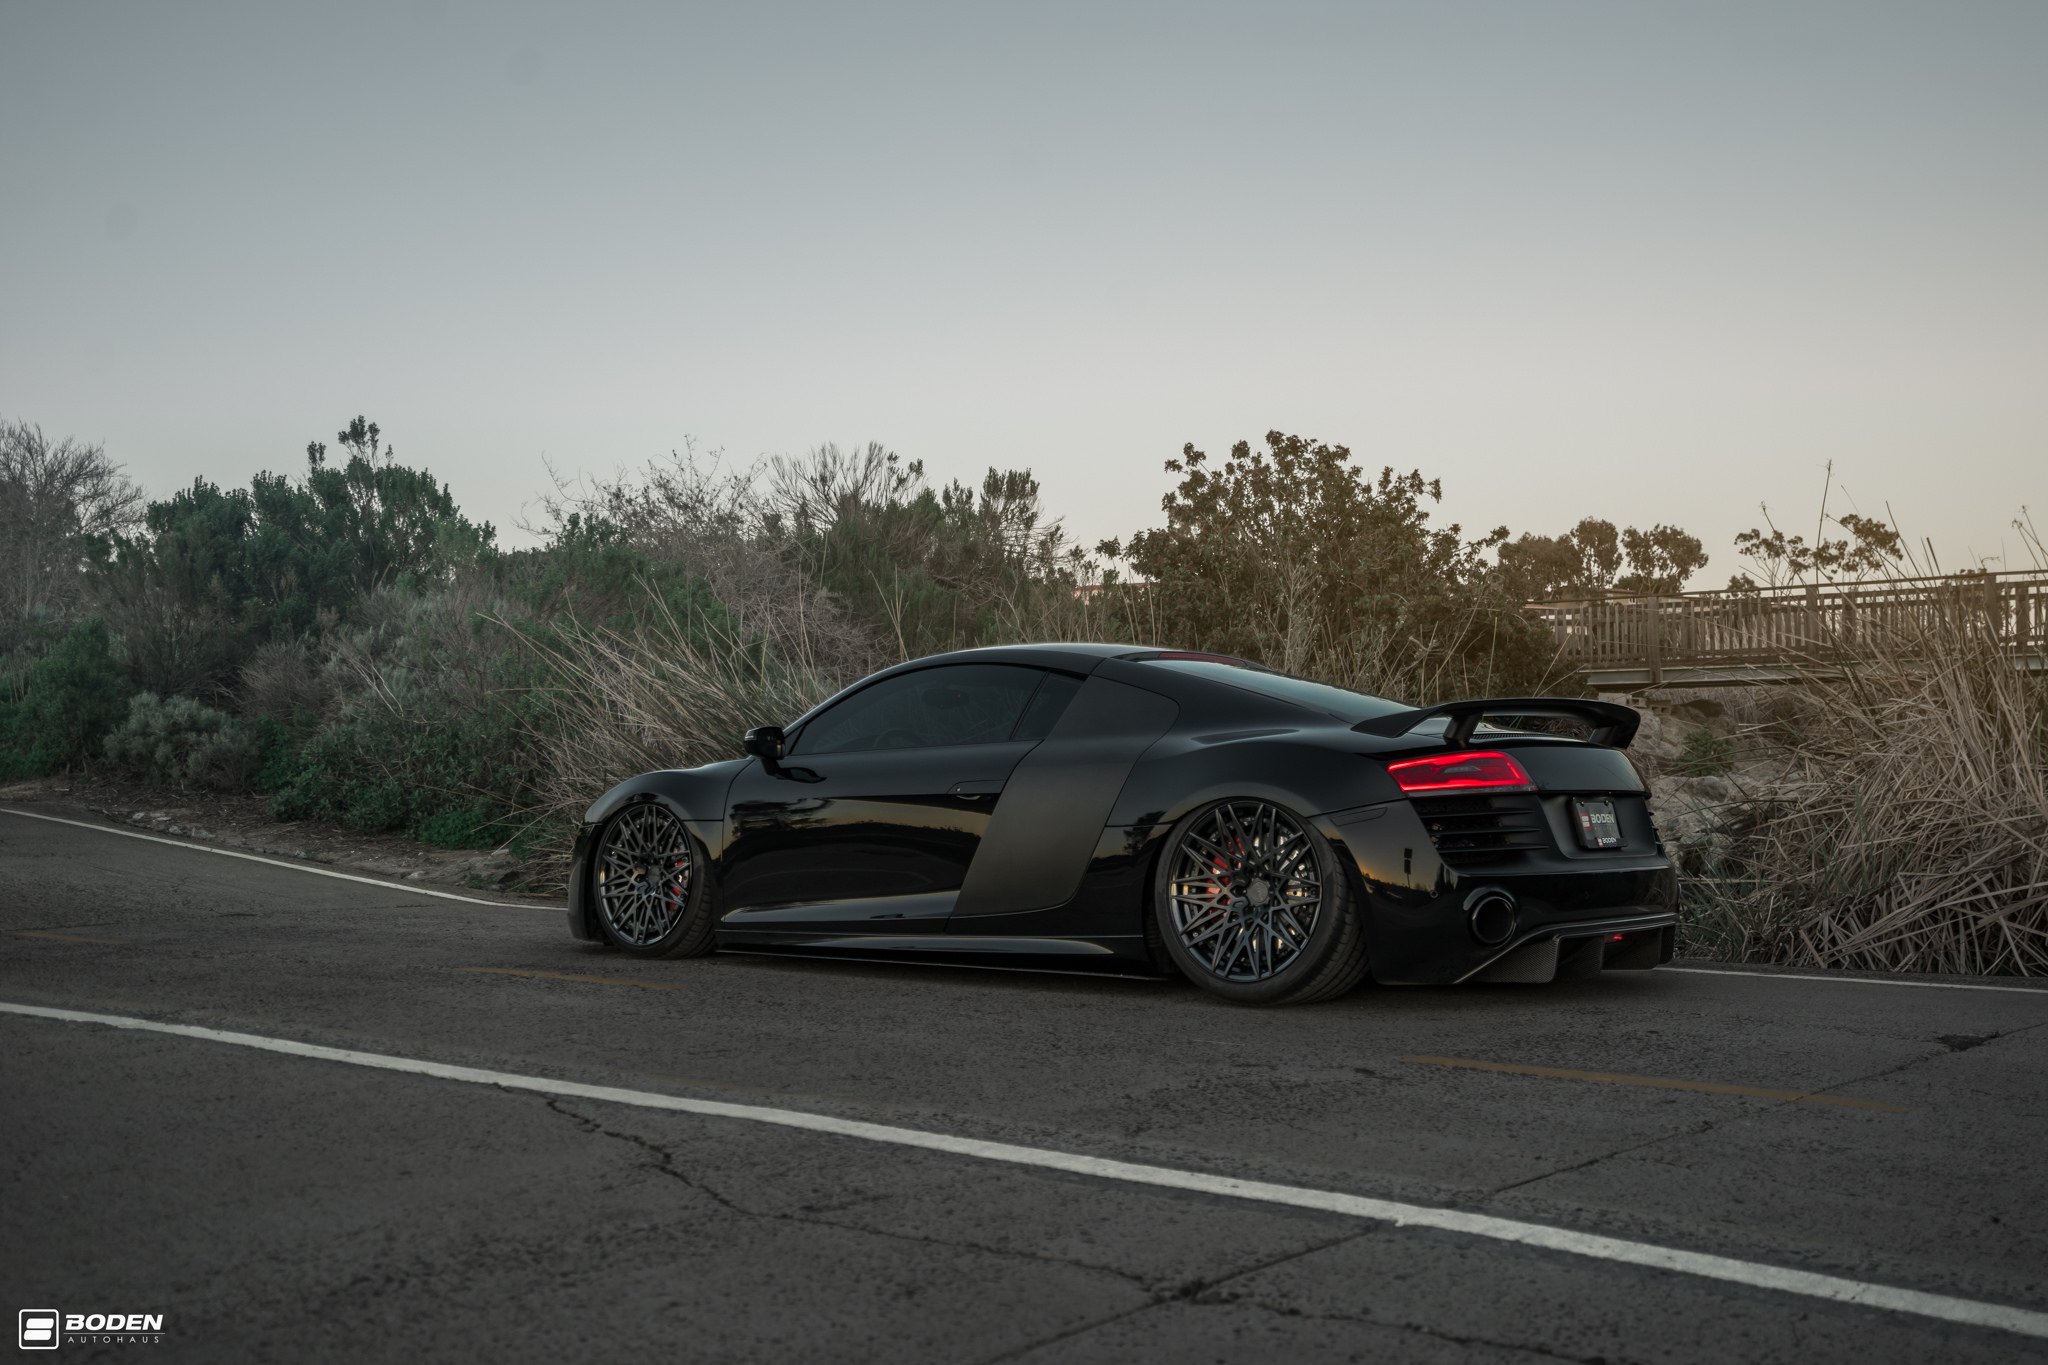 Blacked Out And Stanced: Audi R8 Looking Mean With Aftermarket Goodies —  Carid.Com Gallery